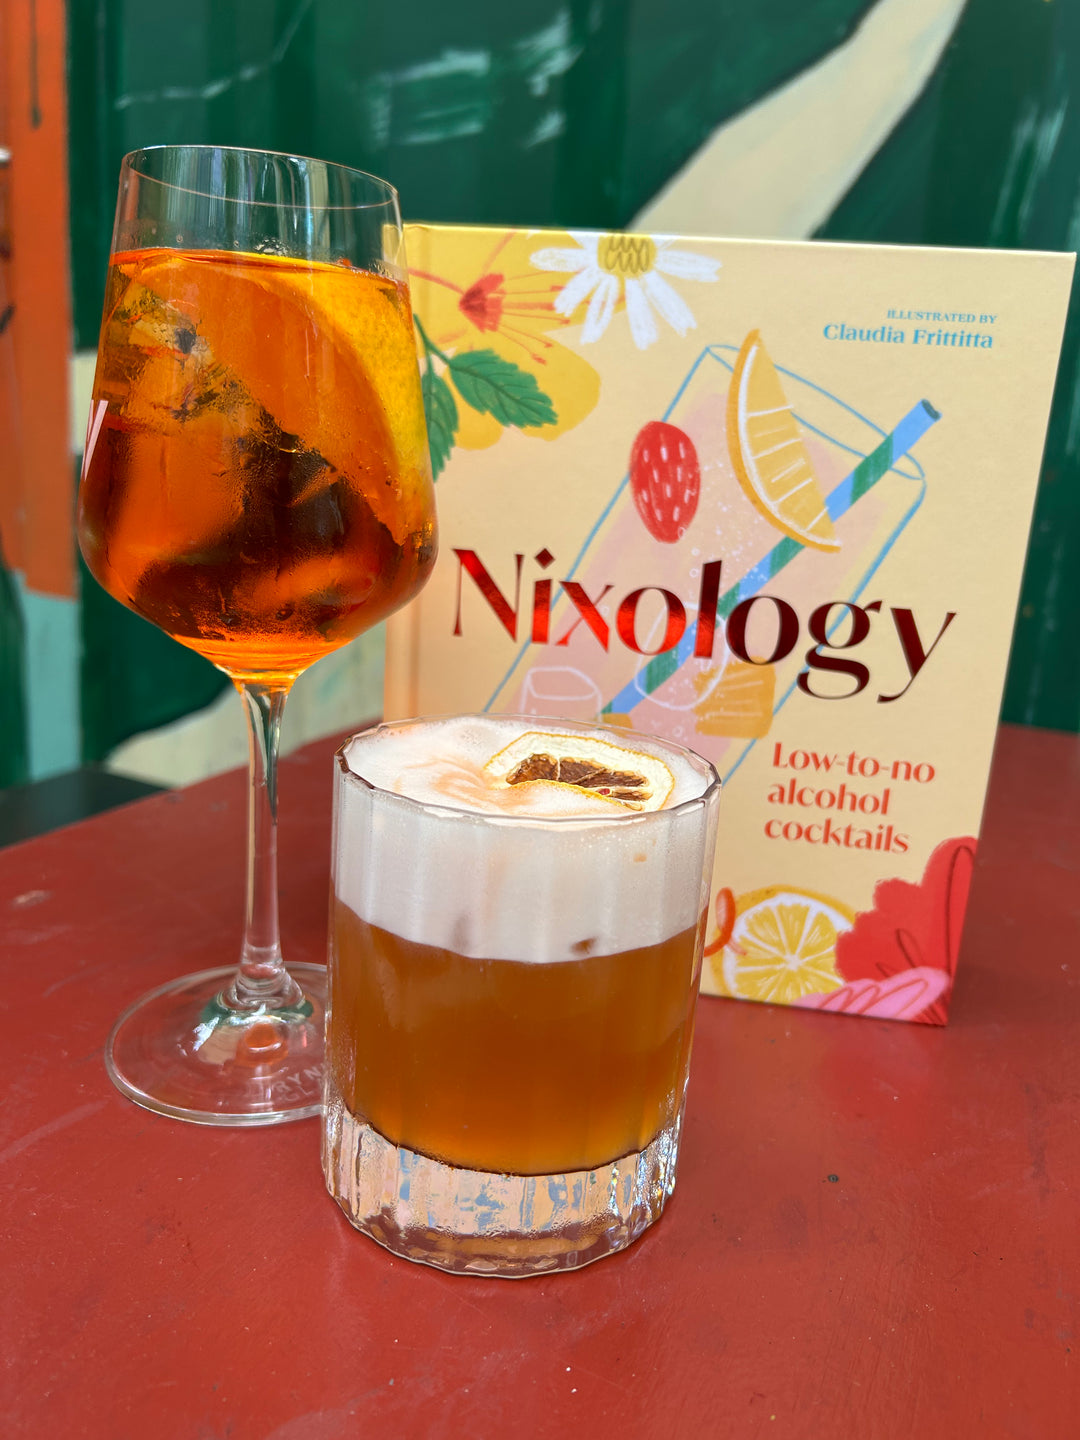 Low to No alcohol cocktails - Nixology, Cocktail Recipe Book